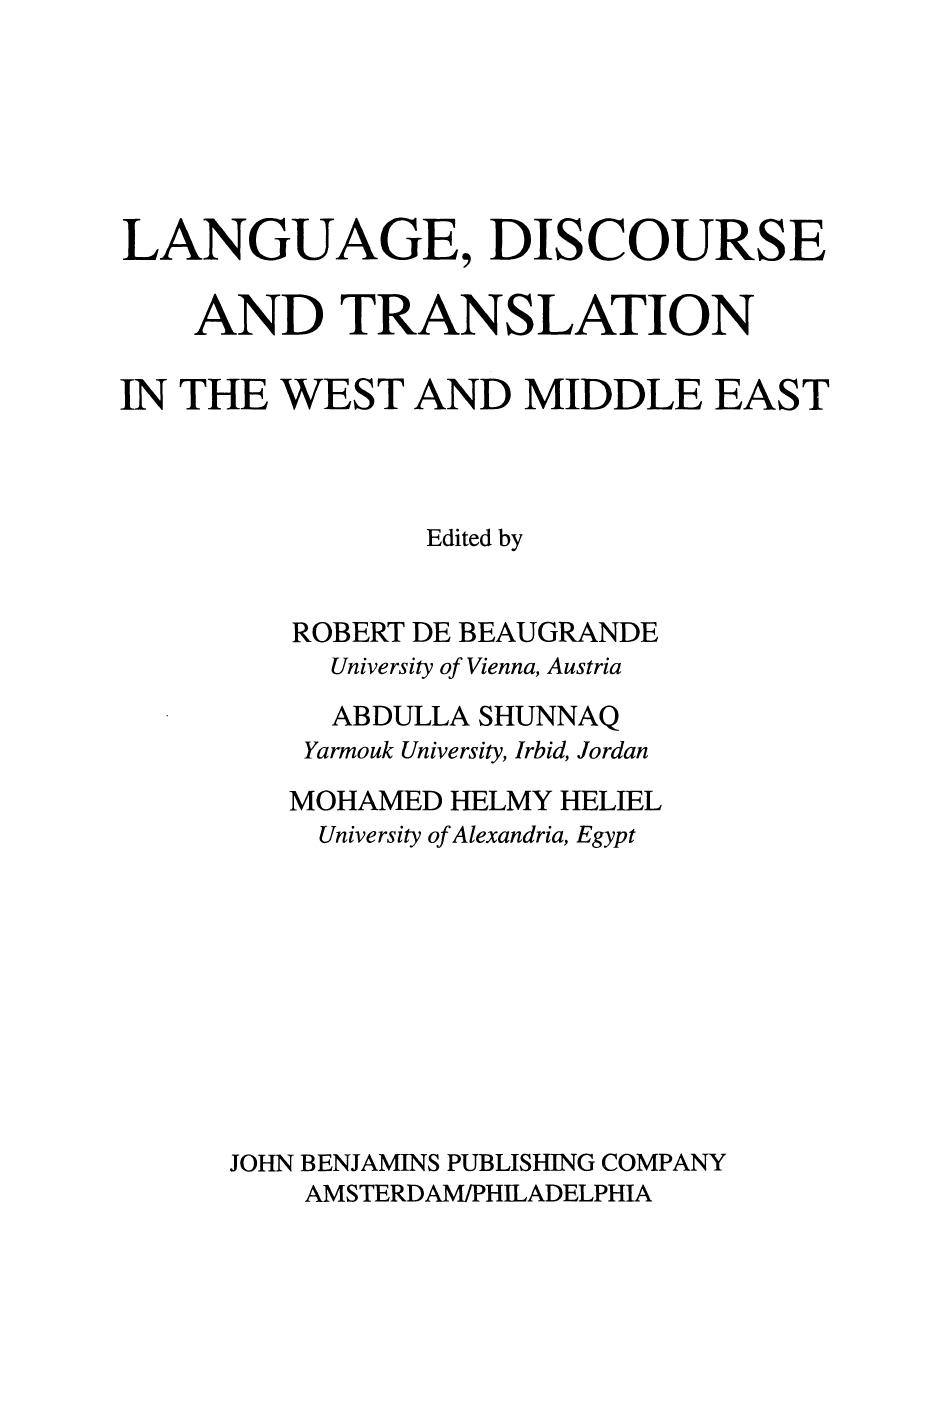 Language, Discourse, and Translation in the West and Middle East